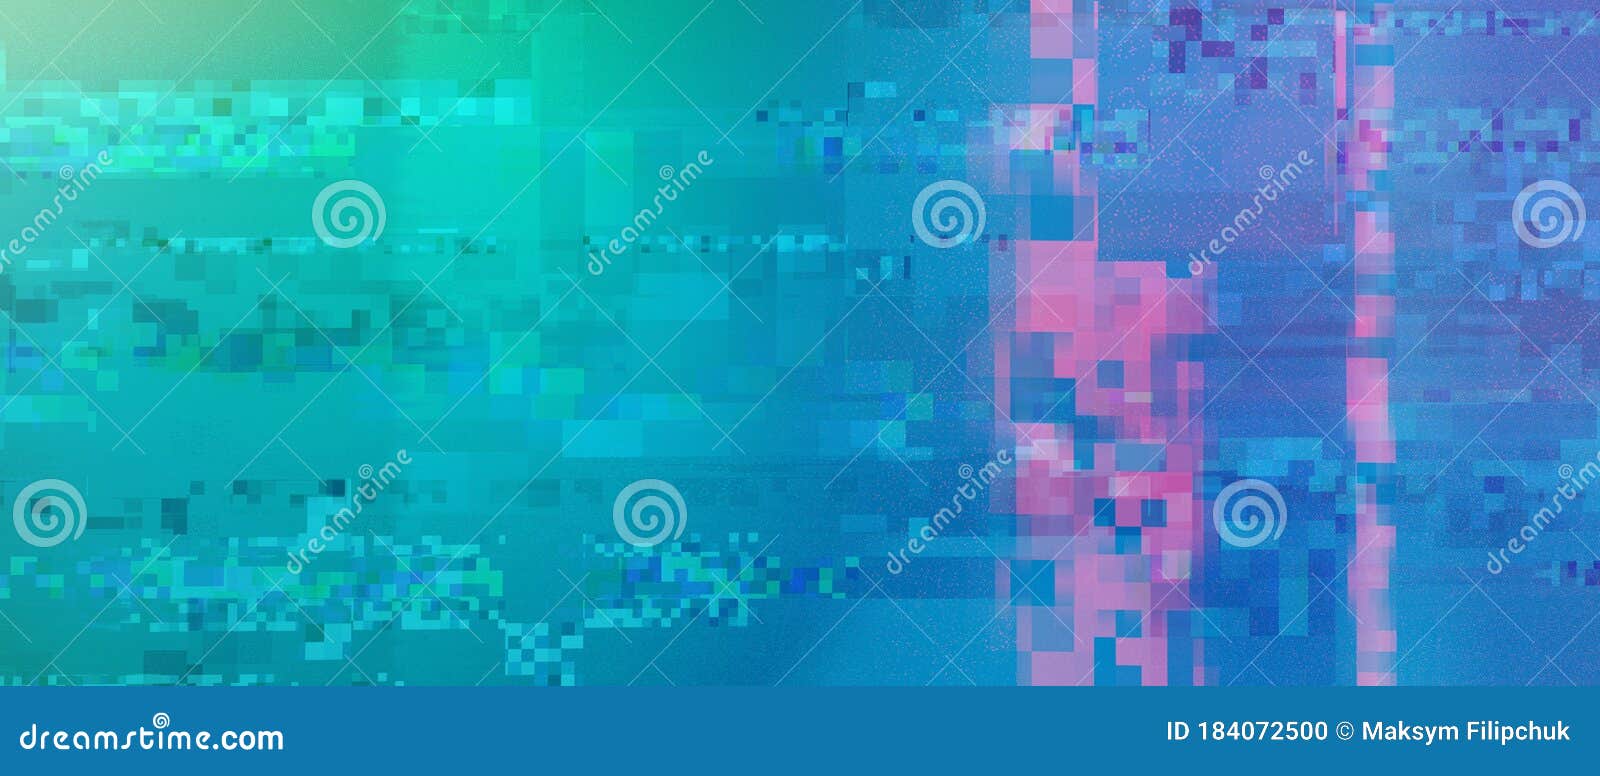 pixelated abstract digital noise background